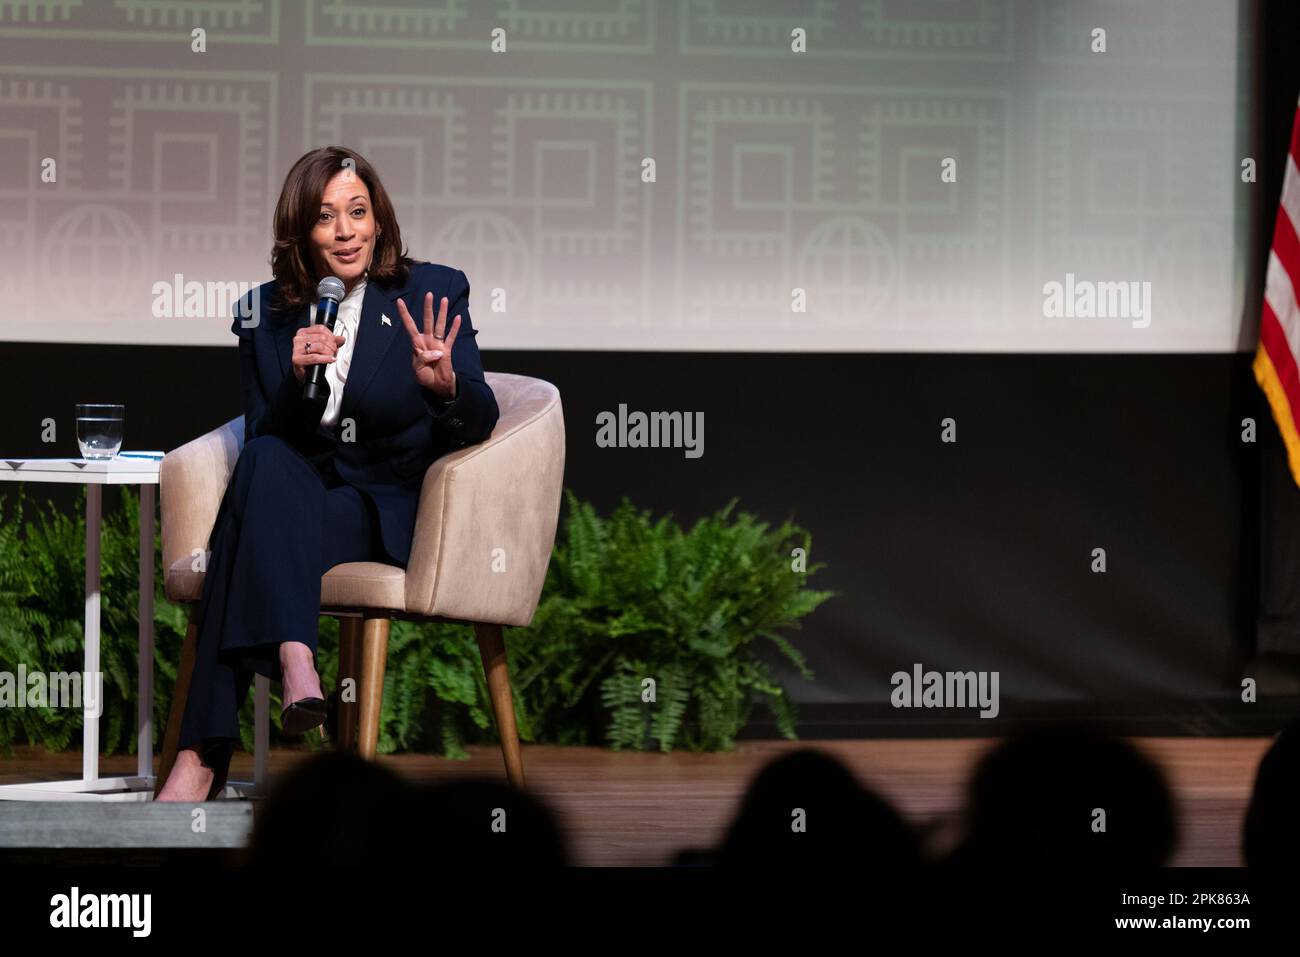 US Vice President Kamala Harris speaks during a conversation with Jessica Nabongo, author and world traveler, and Kevin Young, director of the National Museum of African American History and Culture (NMAAHC), at the NMAAHC in Washington, DC, US, on Wednesday, April 5, 2023. Harris's recent trip to Africa, at turns eliciting deep reflection from the historic US vice president, offered a chance for her to reconnect with Black Americans whose support is crucial for her and President Biden's looming reelection bid. Photographer: Cheriss May/Pool/Sipa USA Stock Photo